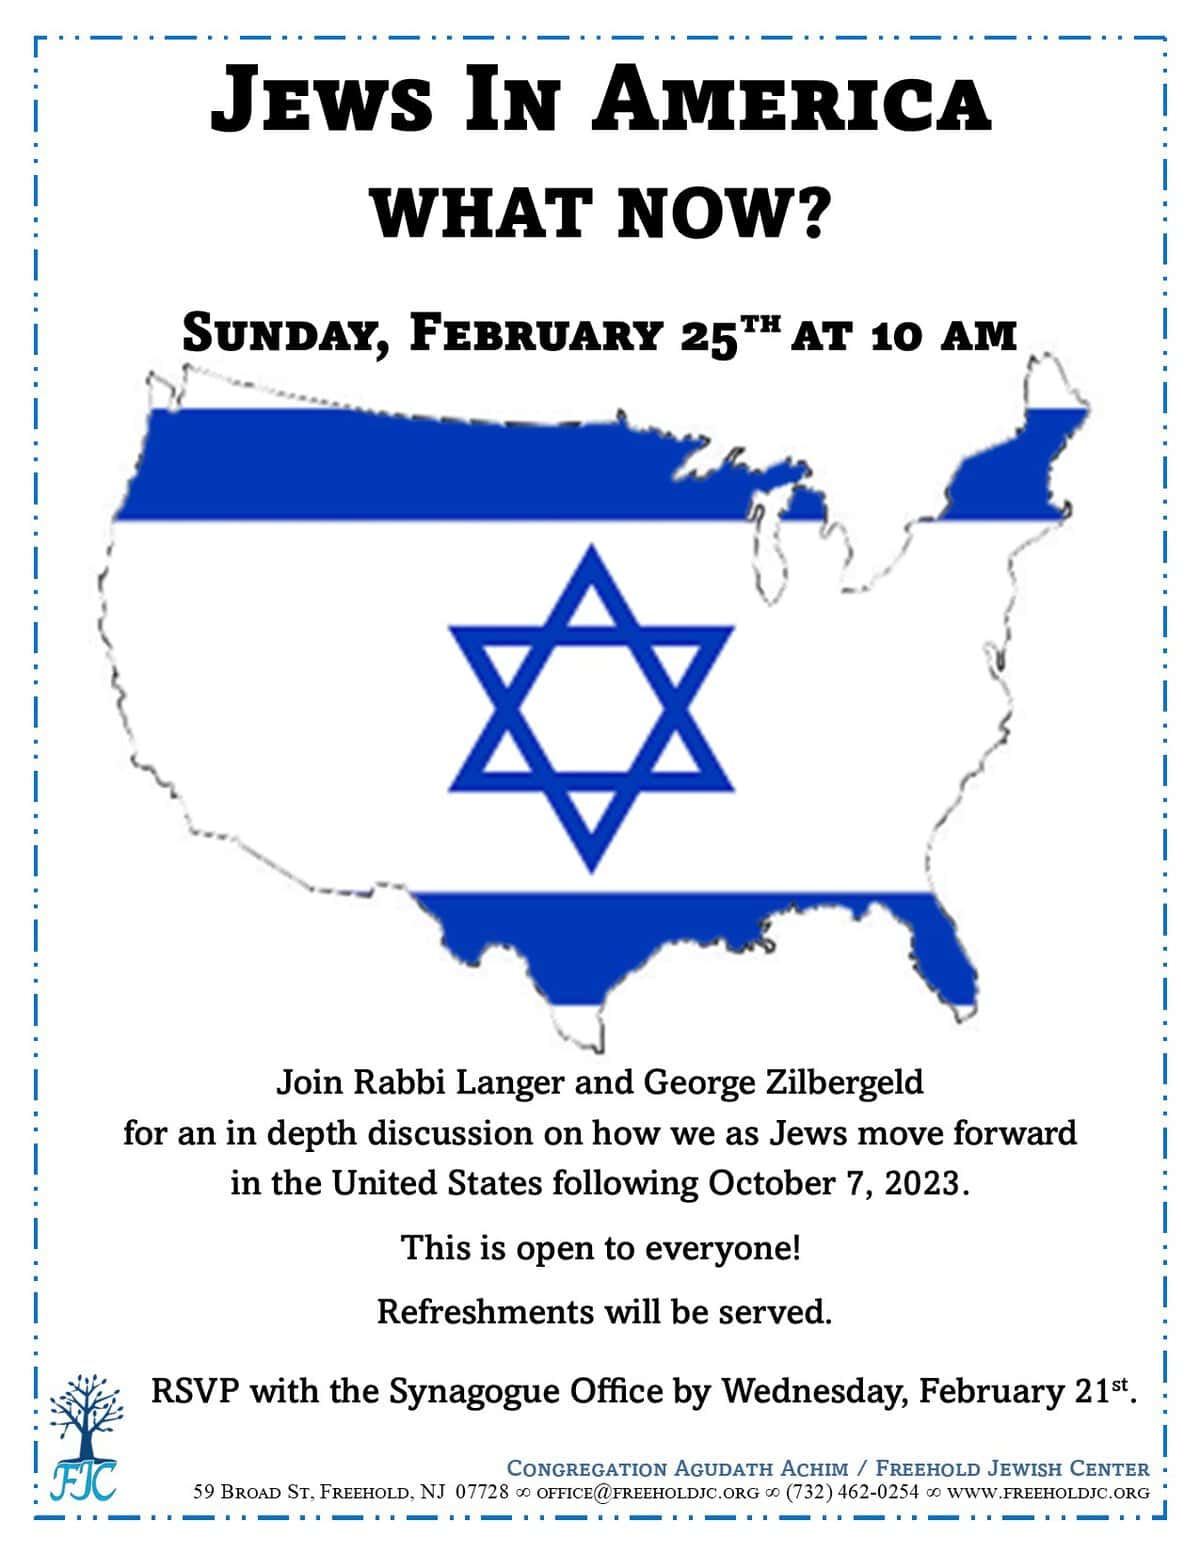 Jews In America - What Now?